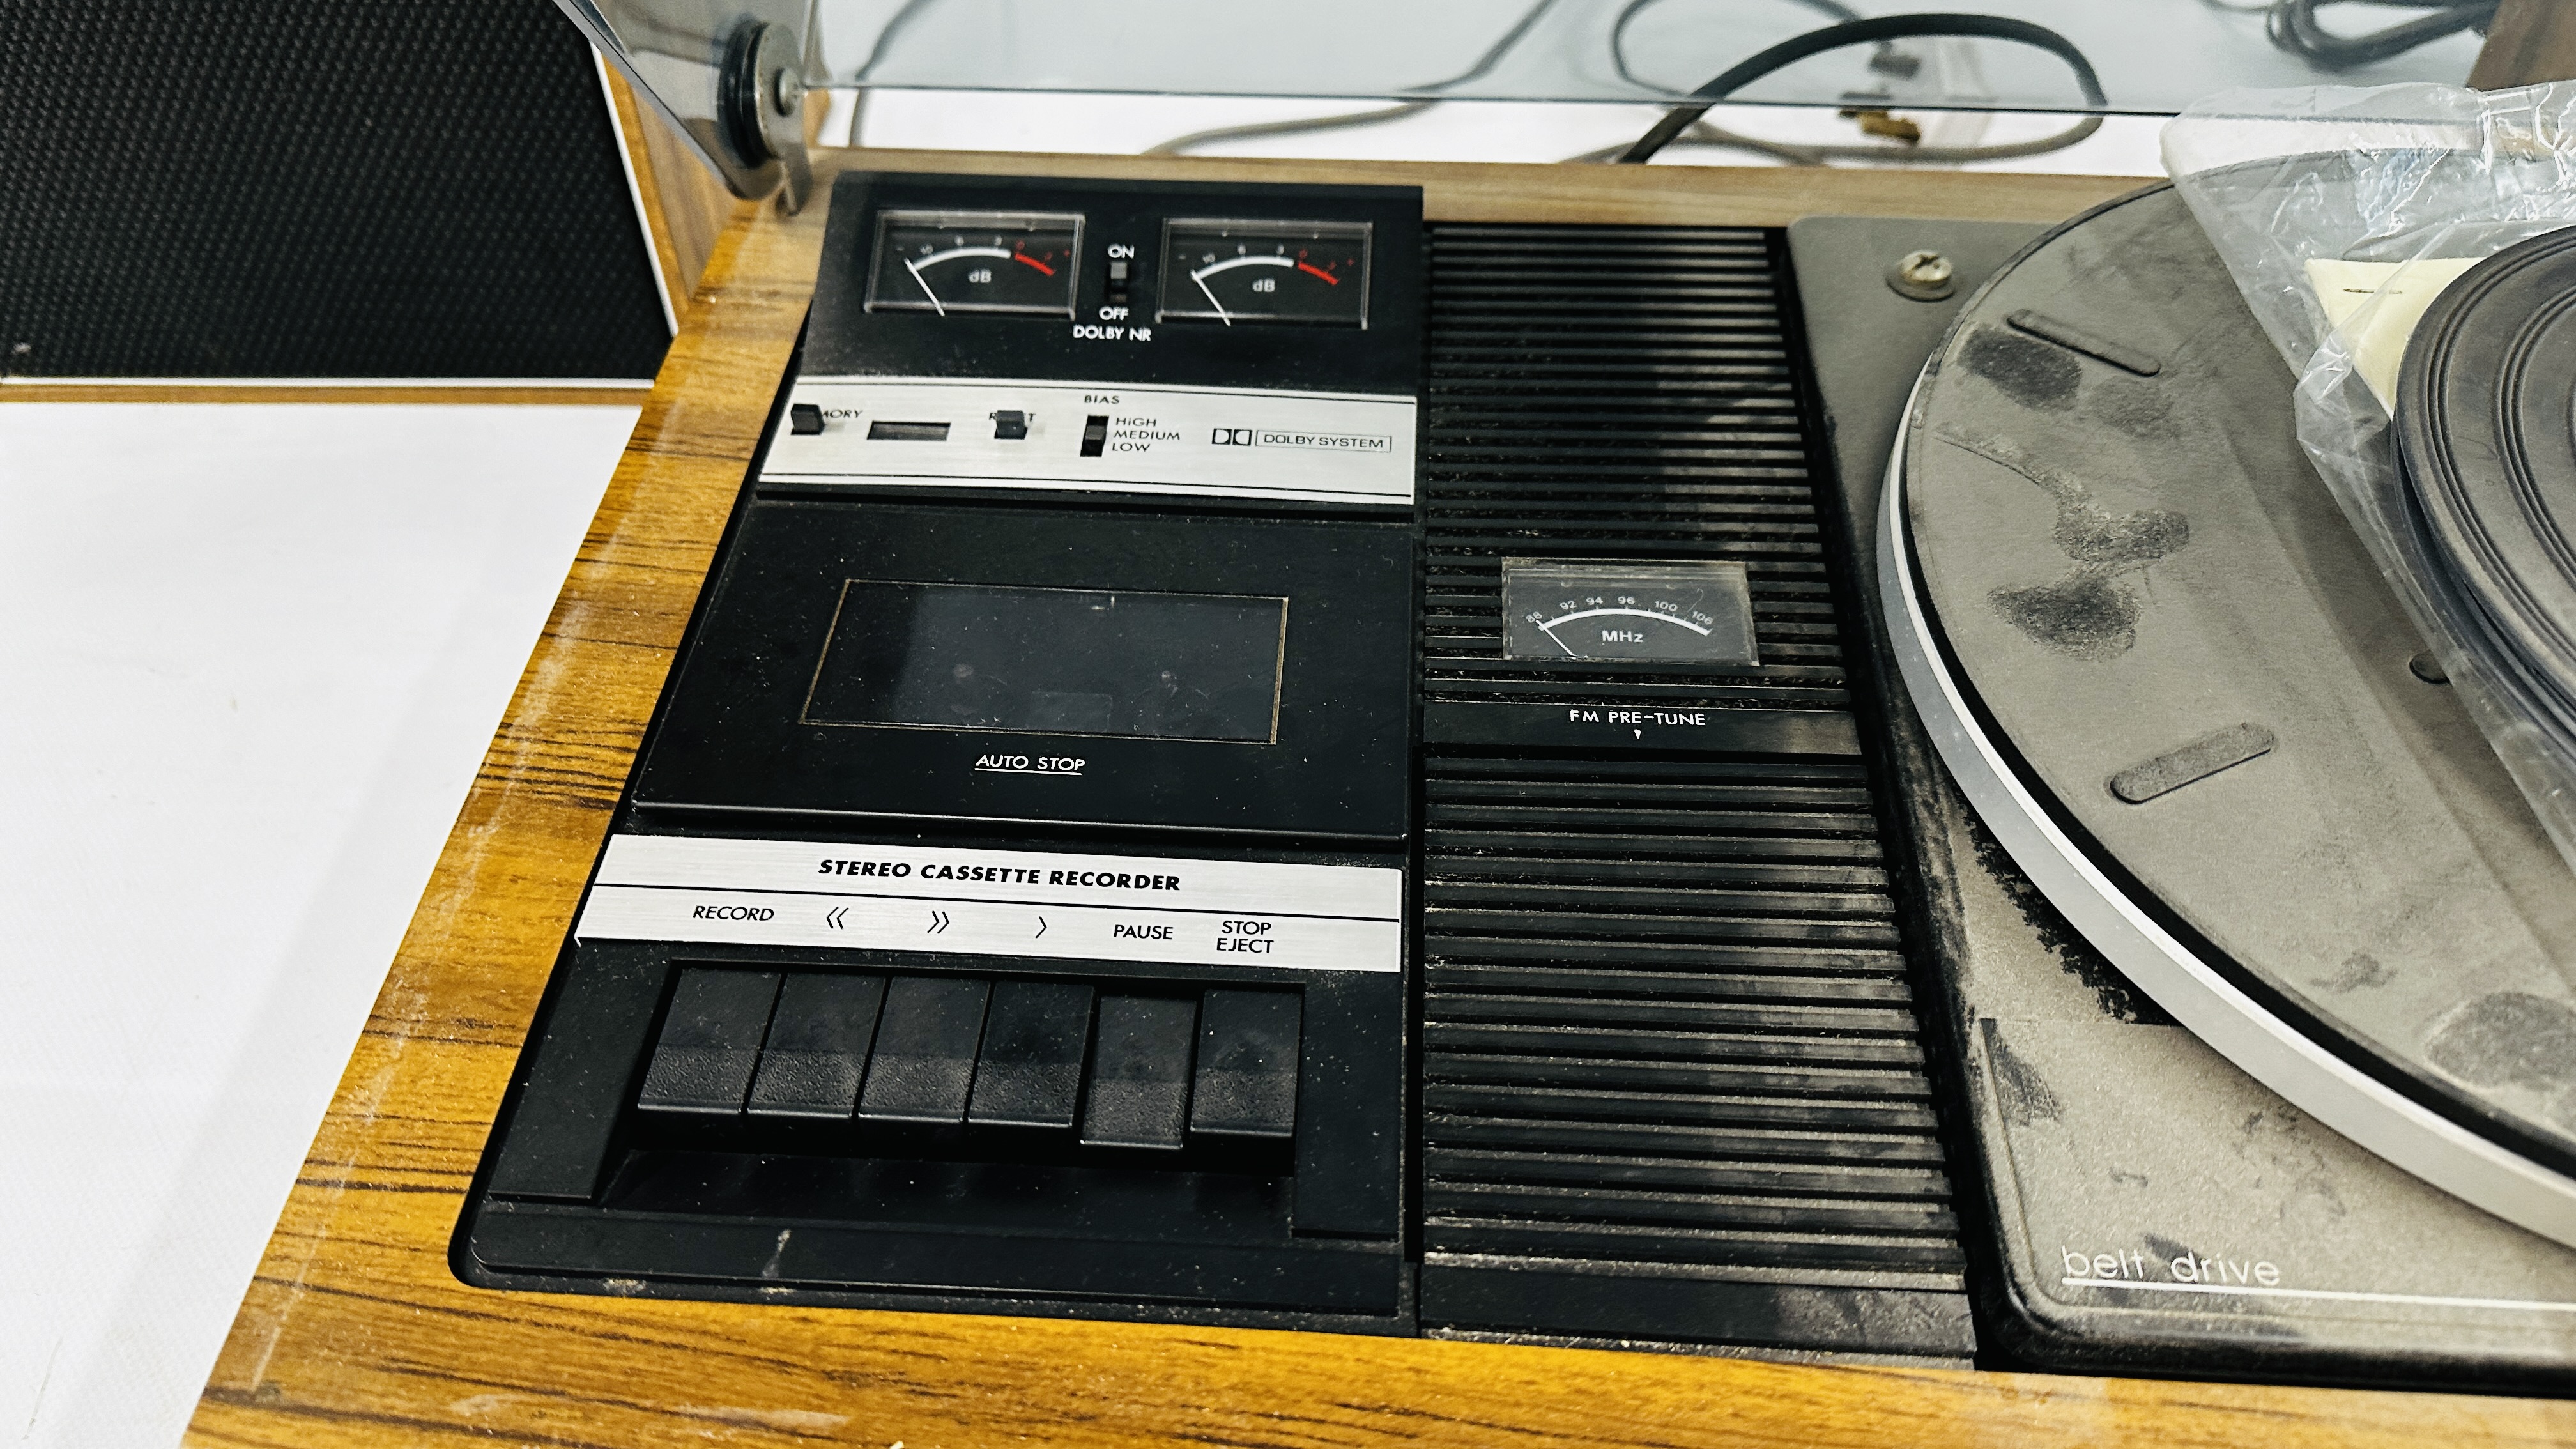 A FERGUSON STUDIO 50D HIFI SYSTEM RECORD/RADIO/TAPE (COLLECTORS ITEM ONLY) ALONG WITH A PAIR OF - Image 4 of 7